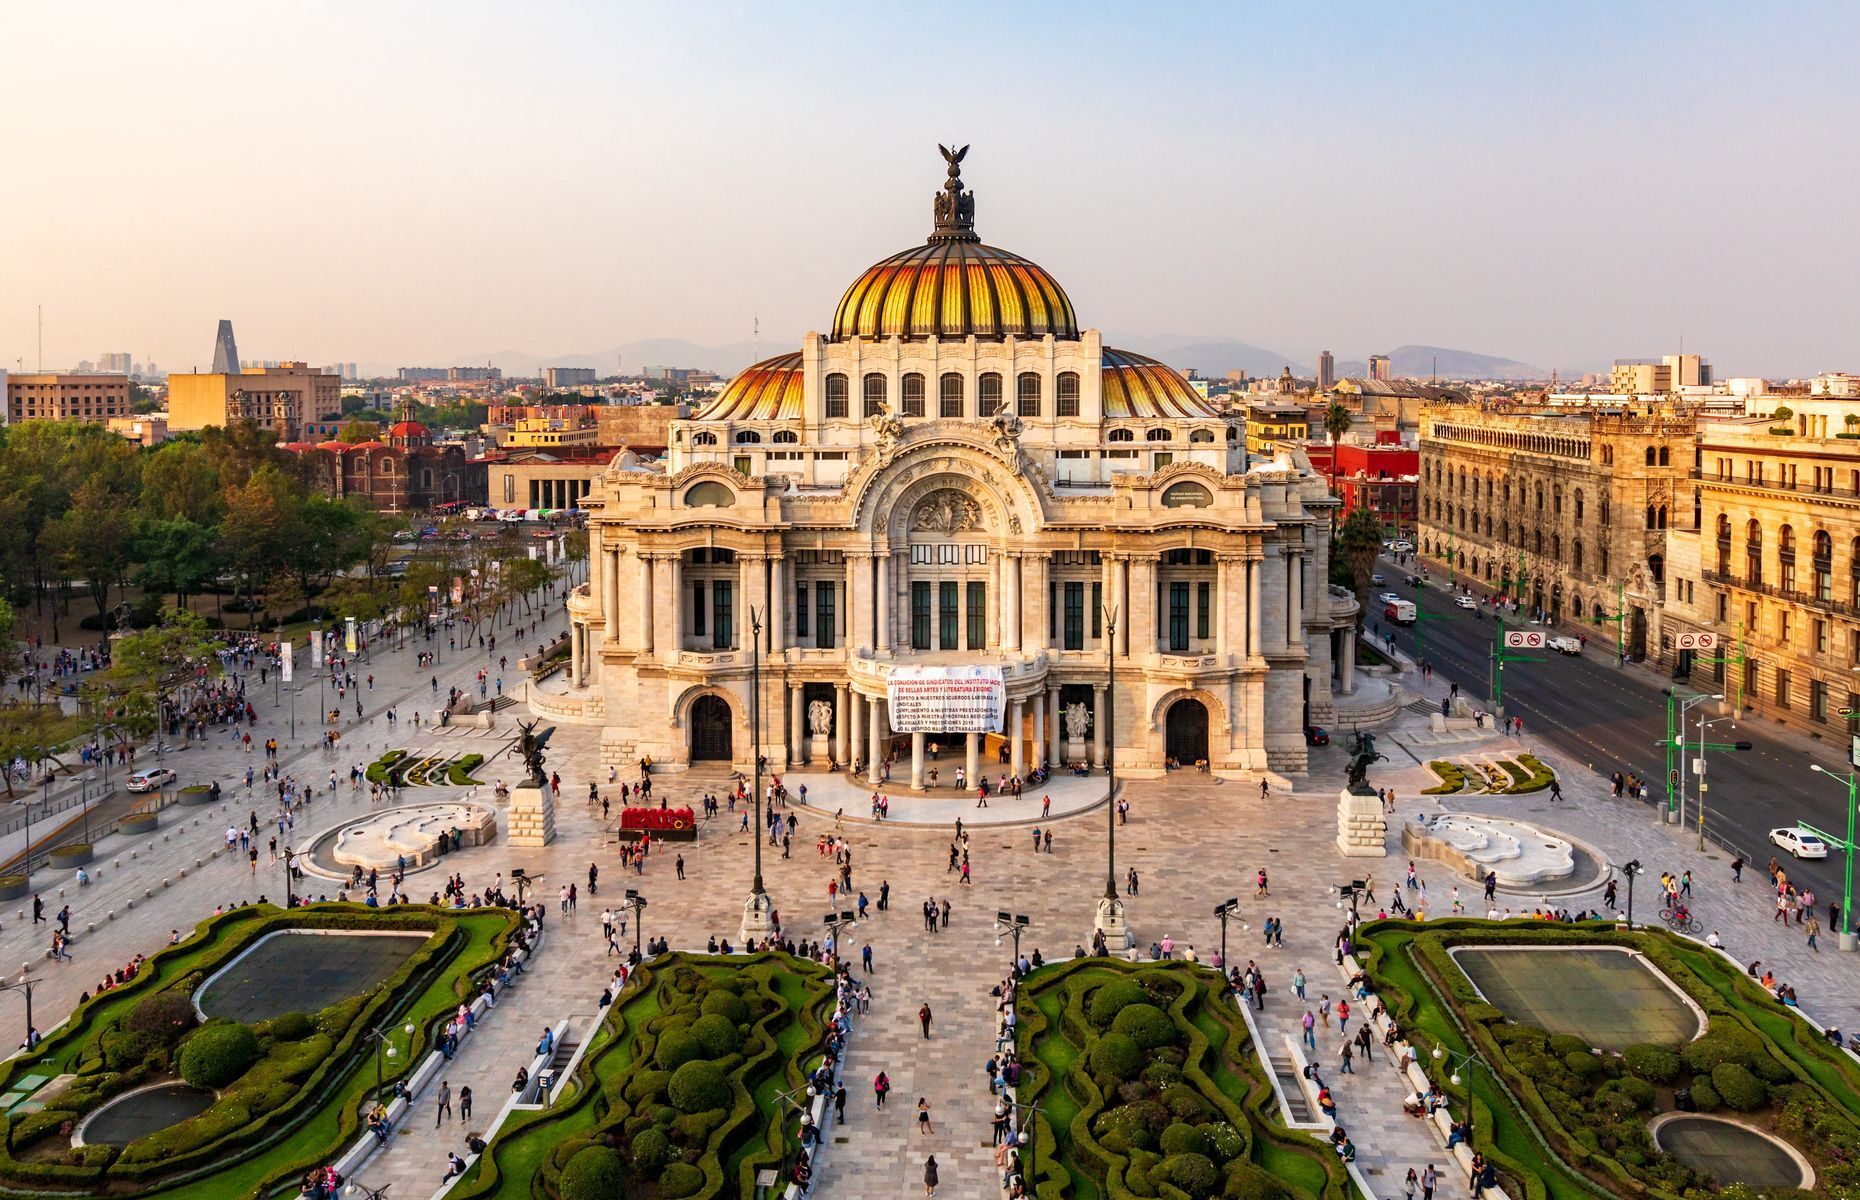 <p>For a cultural feast, add a foray into <a href="https://www.lonelyplanet.com/mexico/mexico-city" rel="noreferrer noopener">Mexico City</a>. In addition to its superb historical downtown, visit the <a href="https://www.museofridakahlo.org.mx/?lang=en" rel="noreferrer noopener">Frida Kahlo Museum</a> (her former home) and numerous art galleries or cruise through the nearby floating gardens of <a href="https://www.cntraveler.com/activities/mexico-city/floating-gardens-of-xochimilco" rel="noreferrer noopener">Xochimilco</a>. The <a href="https://www.viahero.com/travel-to-mexico/roma-mexico-city" rel="noreferrer noopener">Roma Norte</a> neighbourhood is also a must-see, as is the <a href="https://www.bonappetit.com/city-guides/mexico-city/venue/mercado-san-juan" rel="noreferrer noopener">Mercado de San Juan</a>, <a href="https://www.cntraveler.com/activities/mexico-city/plaza-de-la-constitucion" rel="noreferrer noopener">Plaza de la Constitución</a> and Aztec ruins of the <a href="https://www.mexperience.com/travel/pyramids/templo-mayor/" rel="noreferrer noopener">Templo Mayor</a>.</p>